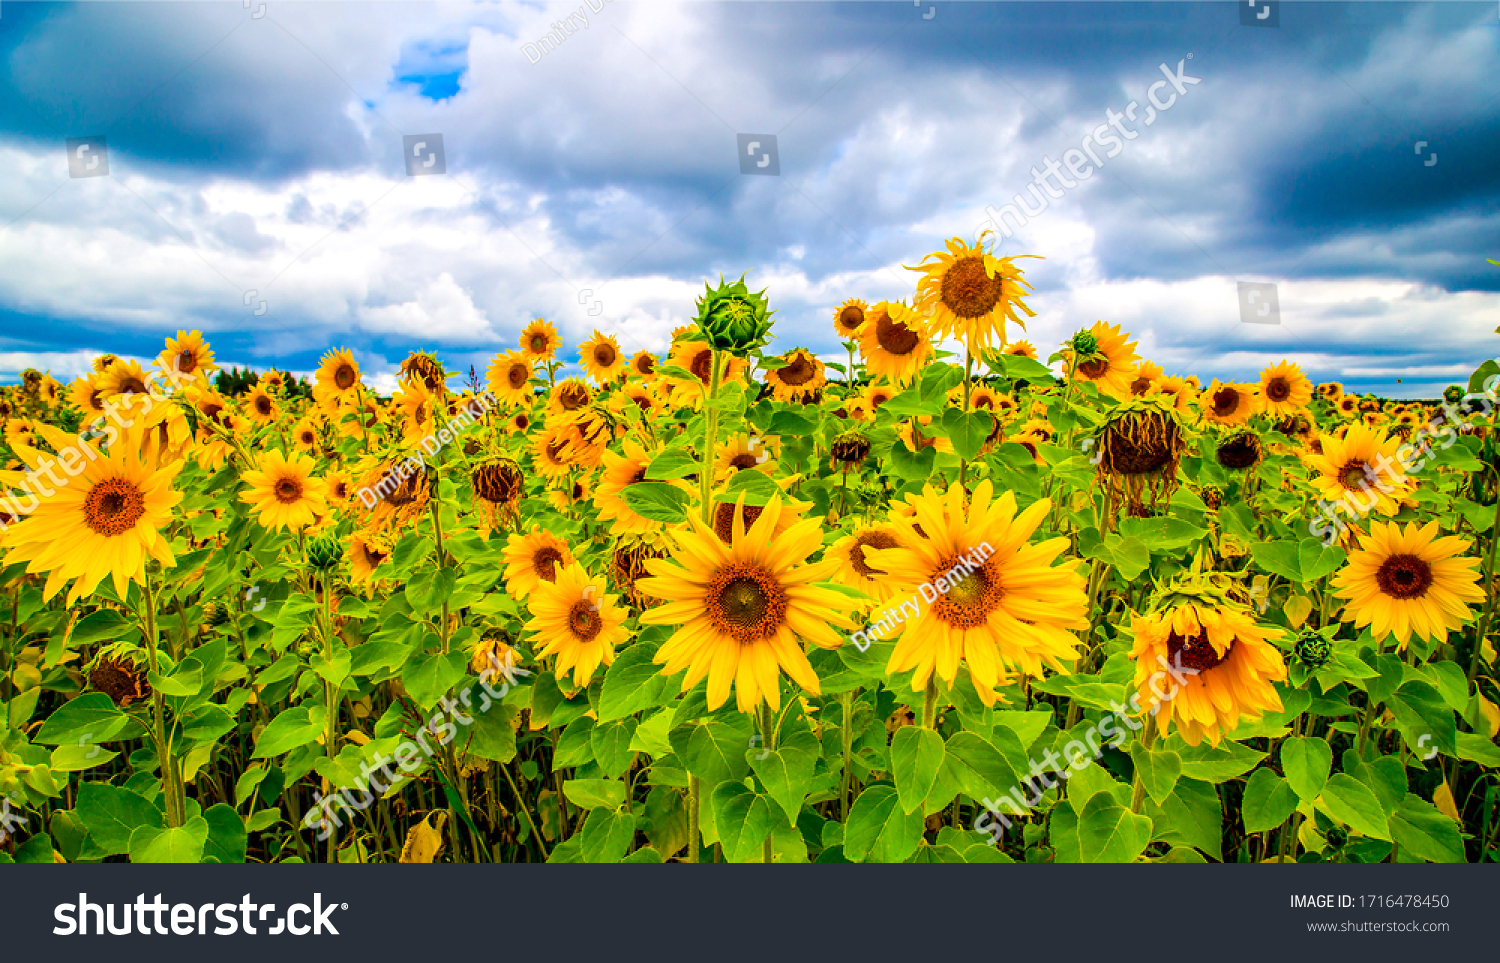 Sunflower flower on agriculture field #1716478450